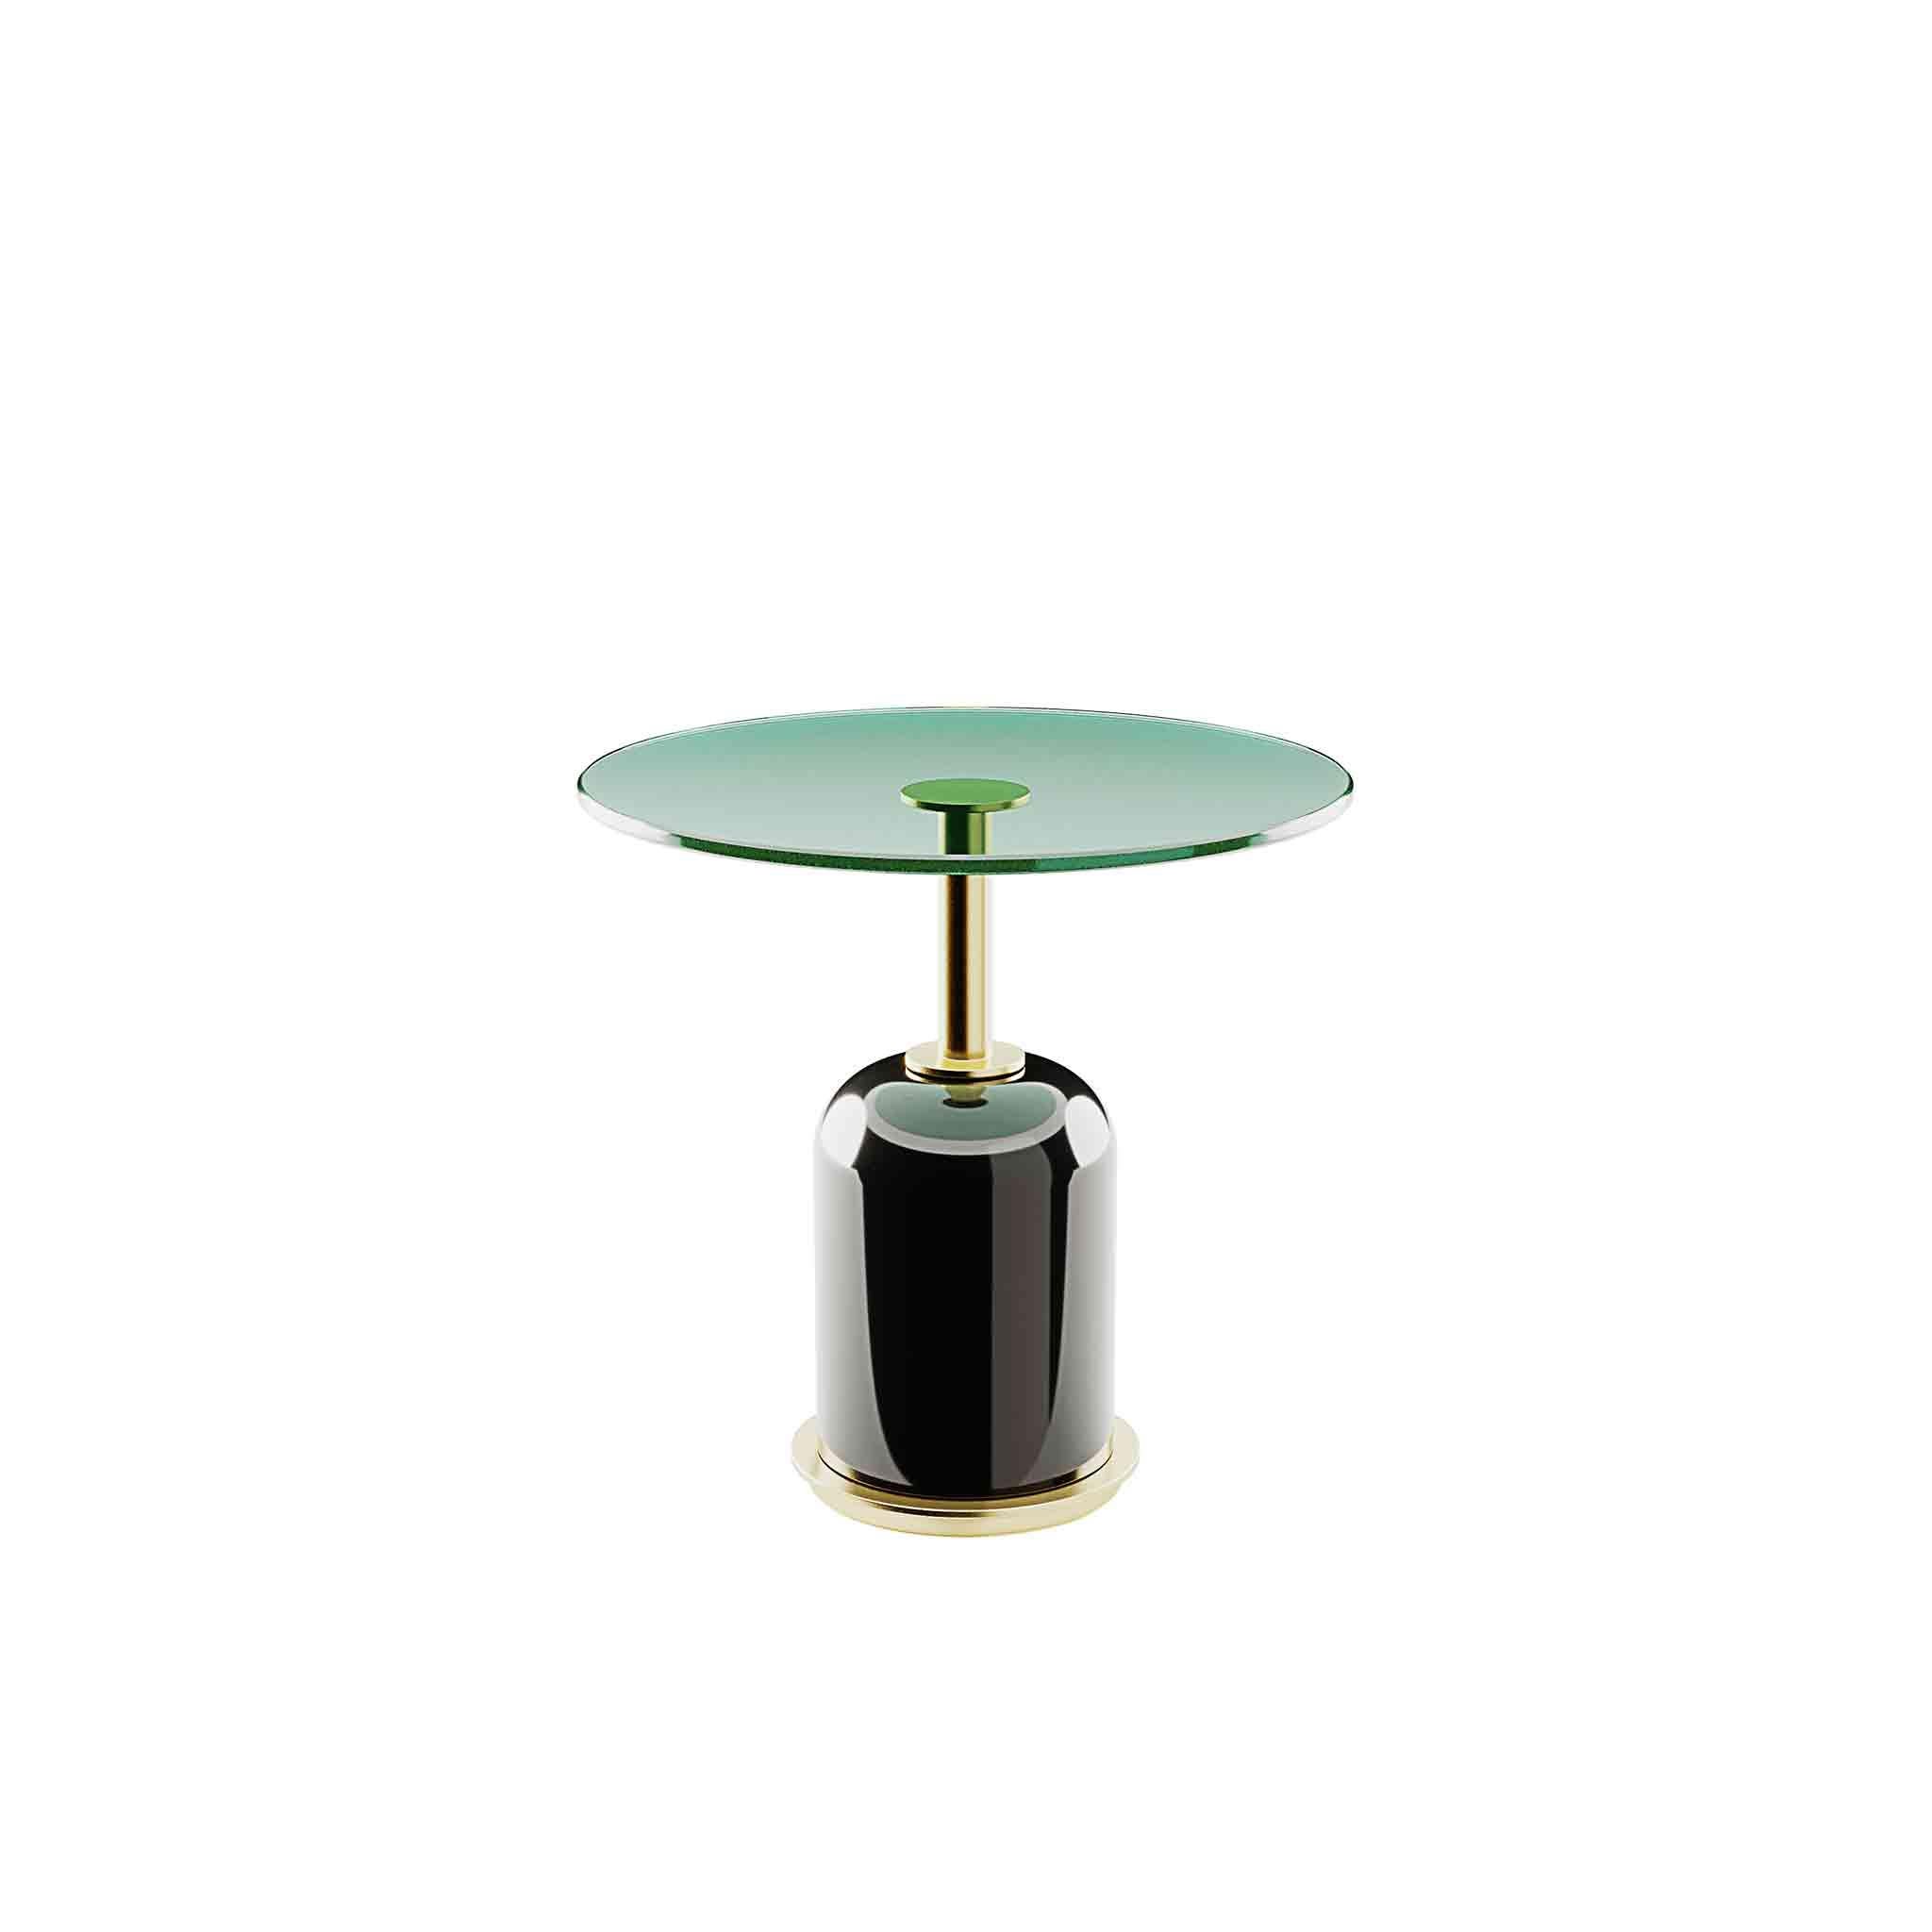 3 Marias Center Tables Set reflects the meaning of discreet luxury. This coffee table set plays with a rigorously calculated heights difference to help you achieve a simple yet elegant living area design concept.

Materials: Small: Top in Green